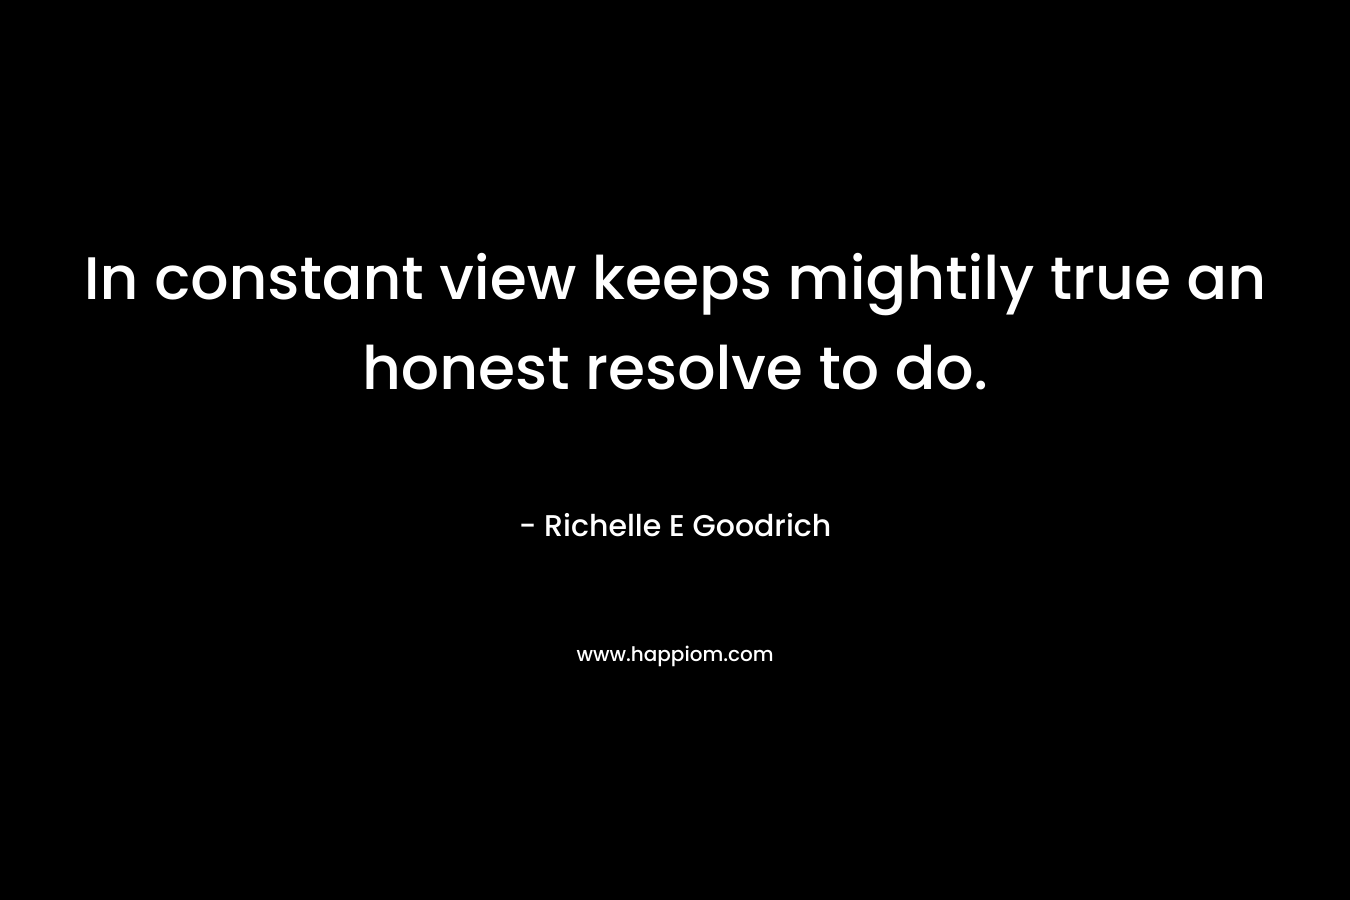 In constant view keeps mightily true an honest resolve to do.